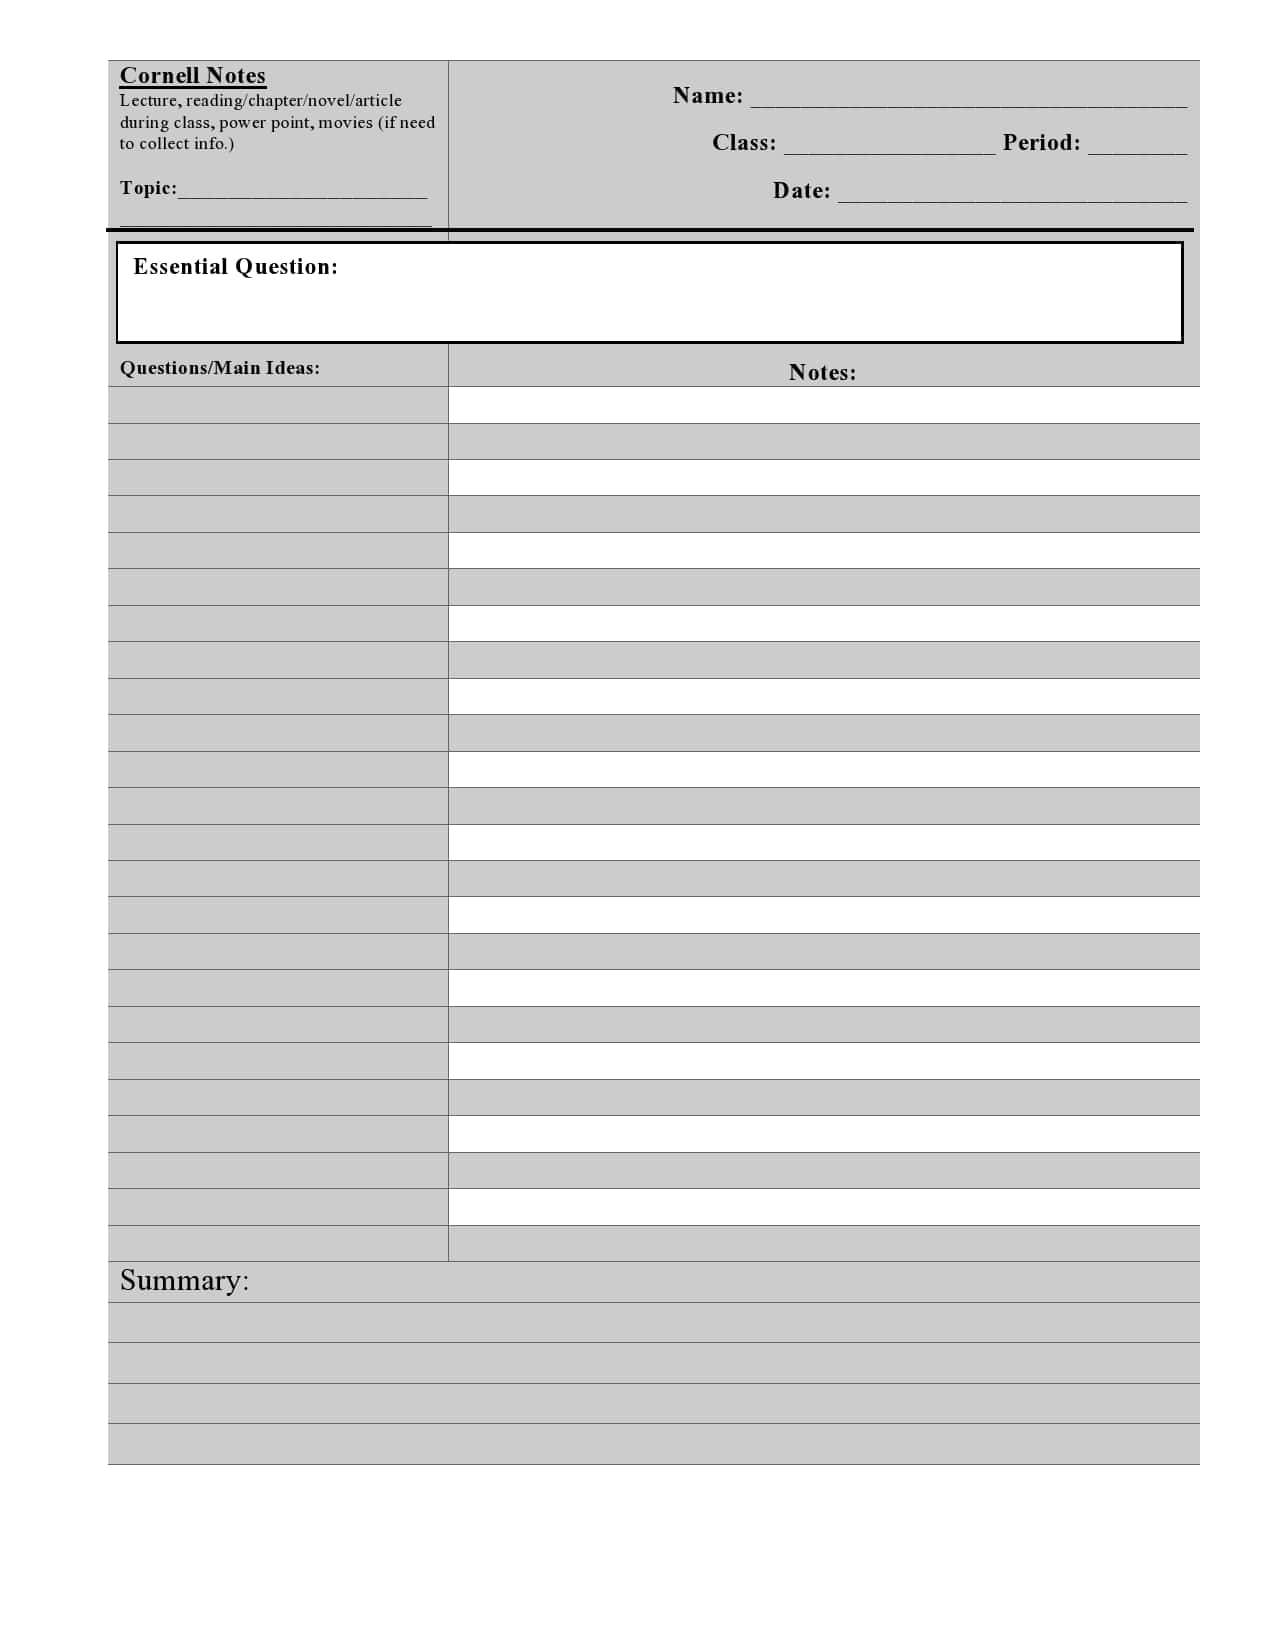 22 Printable Cornell Notes Templates [Free] - TemplateArchive Pertaining To Cornell Note Template Word